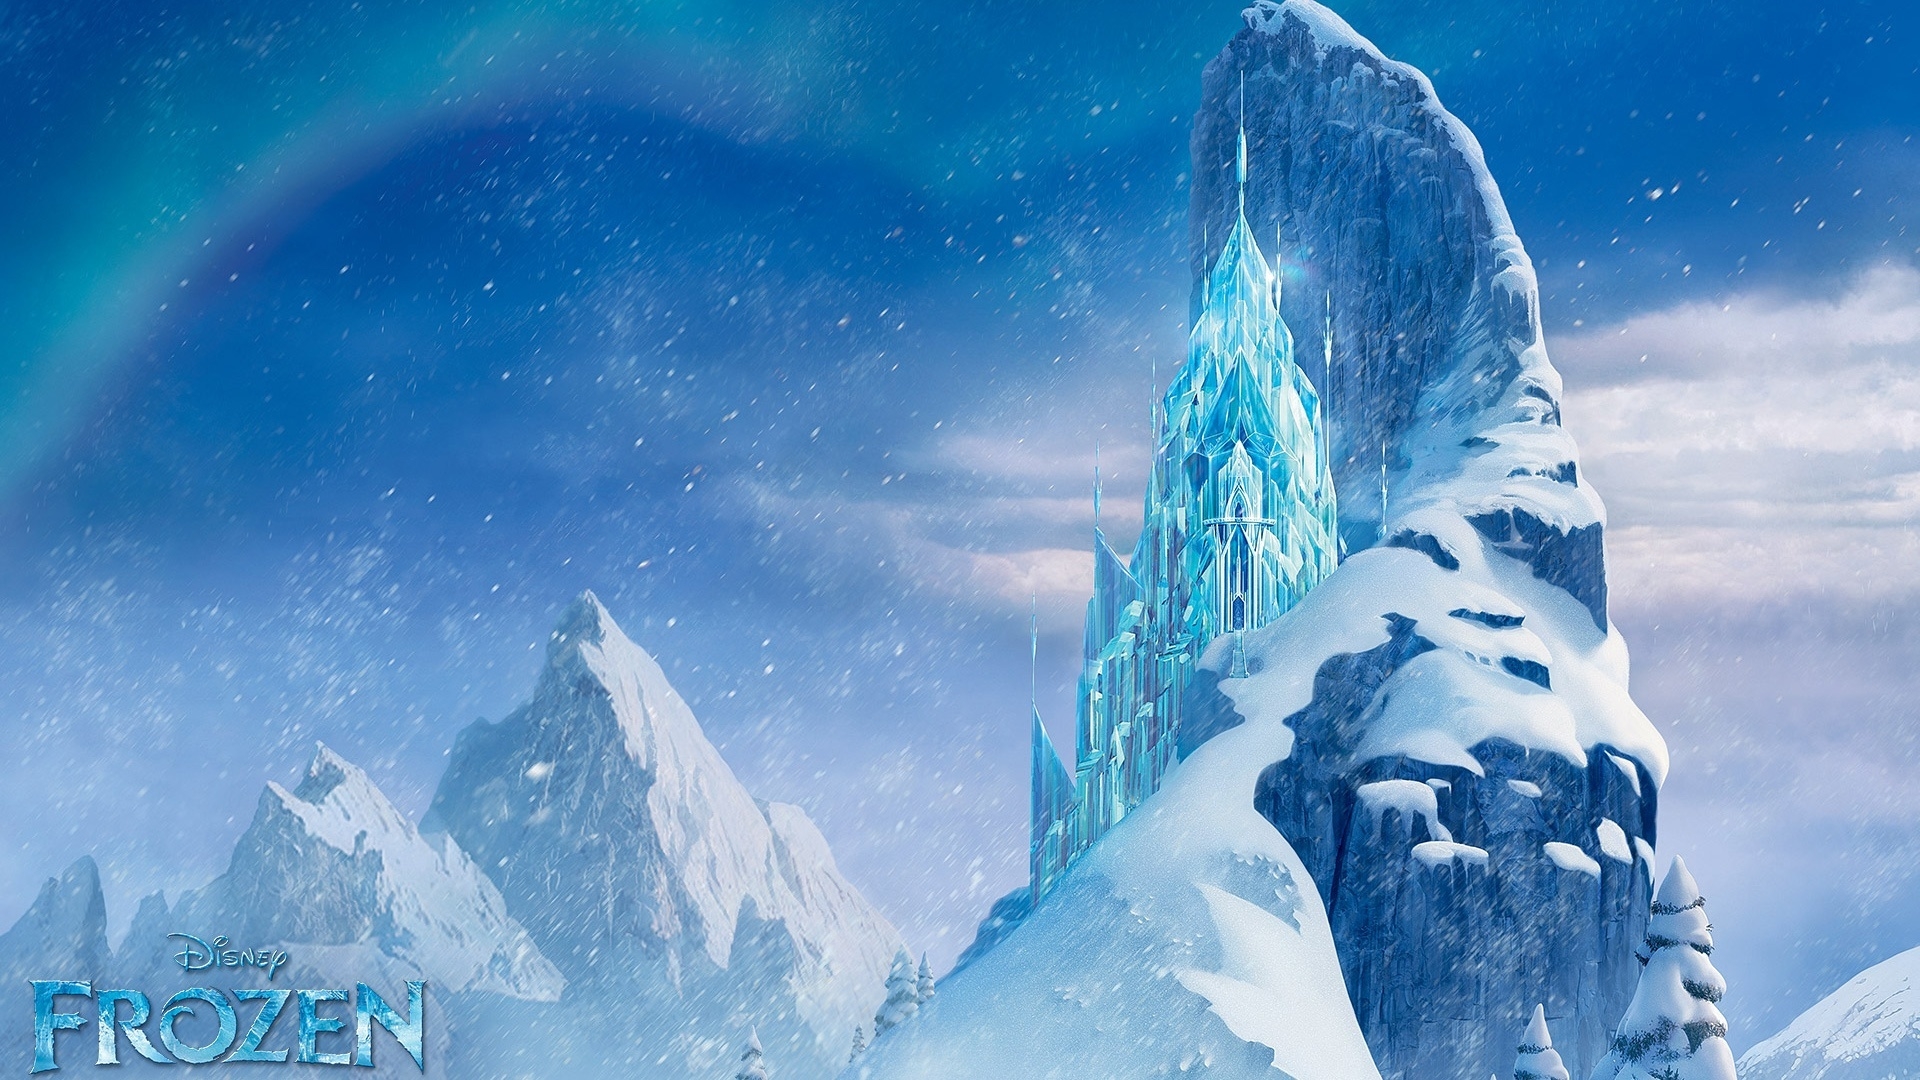 Icecastle in Frozen for 1920 x 1080 HDTV 1080p resolution